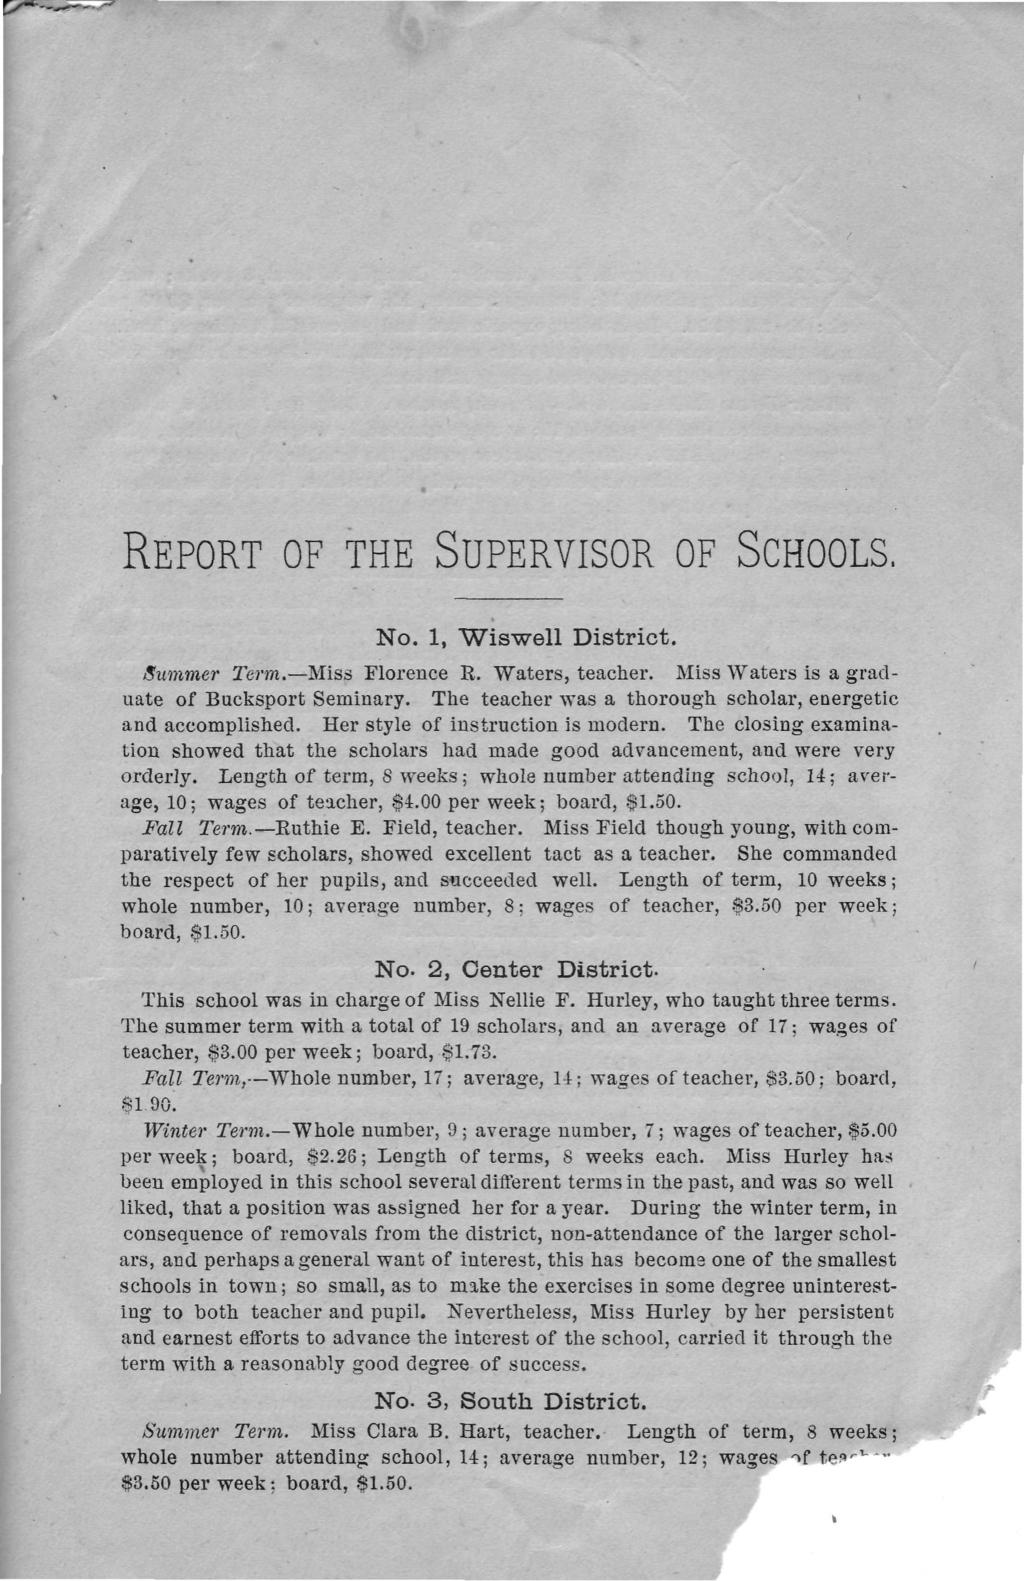 REPORT OF THE SUPERVISOR OF SCHOOLS. No. 1, Wiswell District. Summer Term. Miss Florence R. Waters, teacher. Miss Waters is a graduate of Bucksport Seminary.